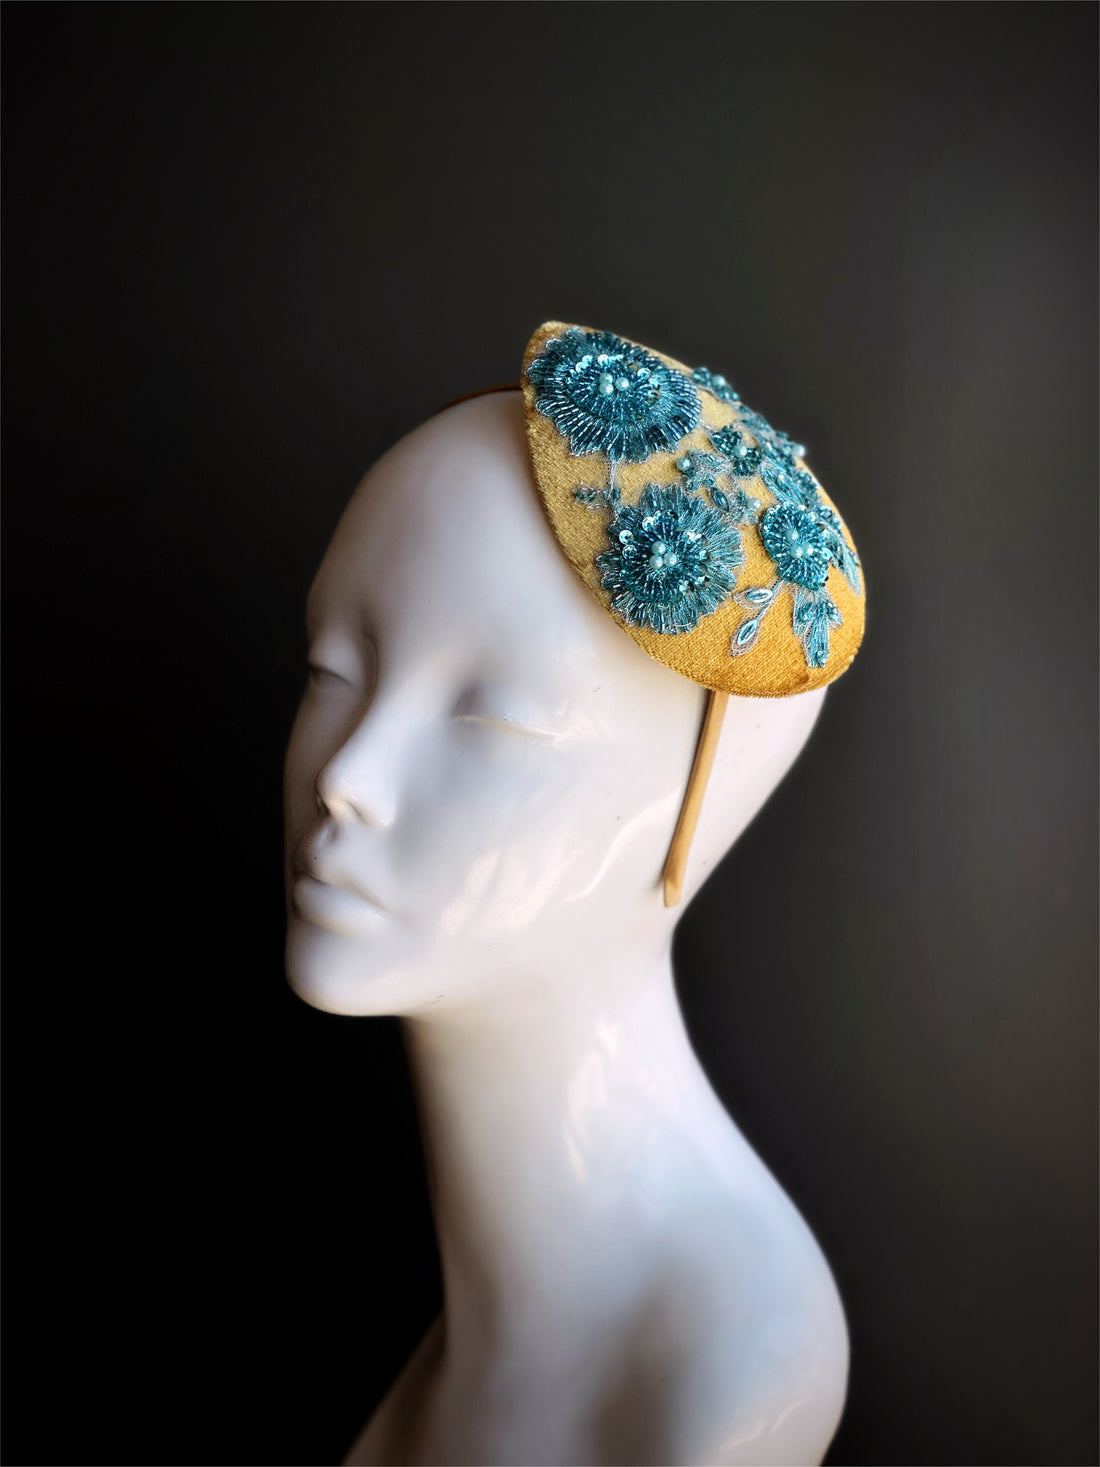 Velvet tear drop shaped fascinator in gold with blue beaded lace design.